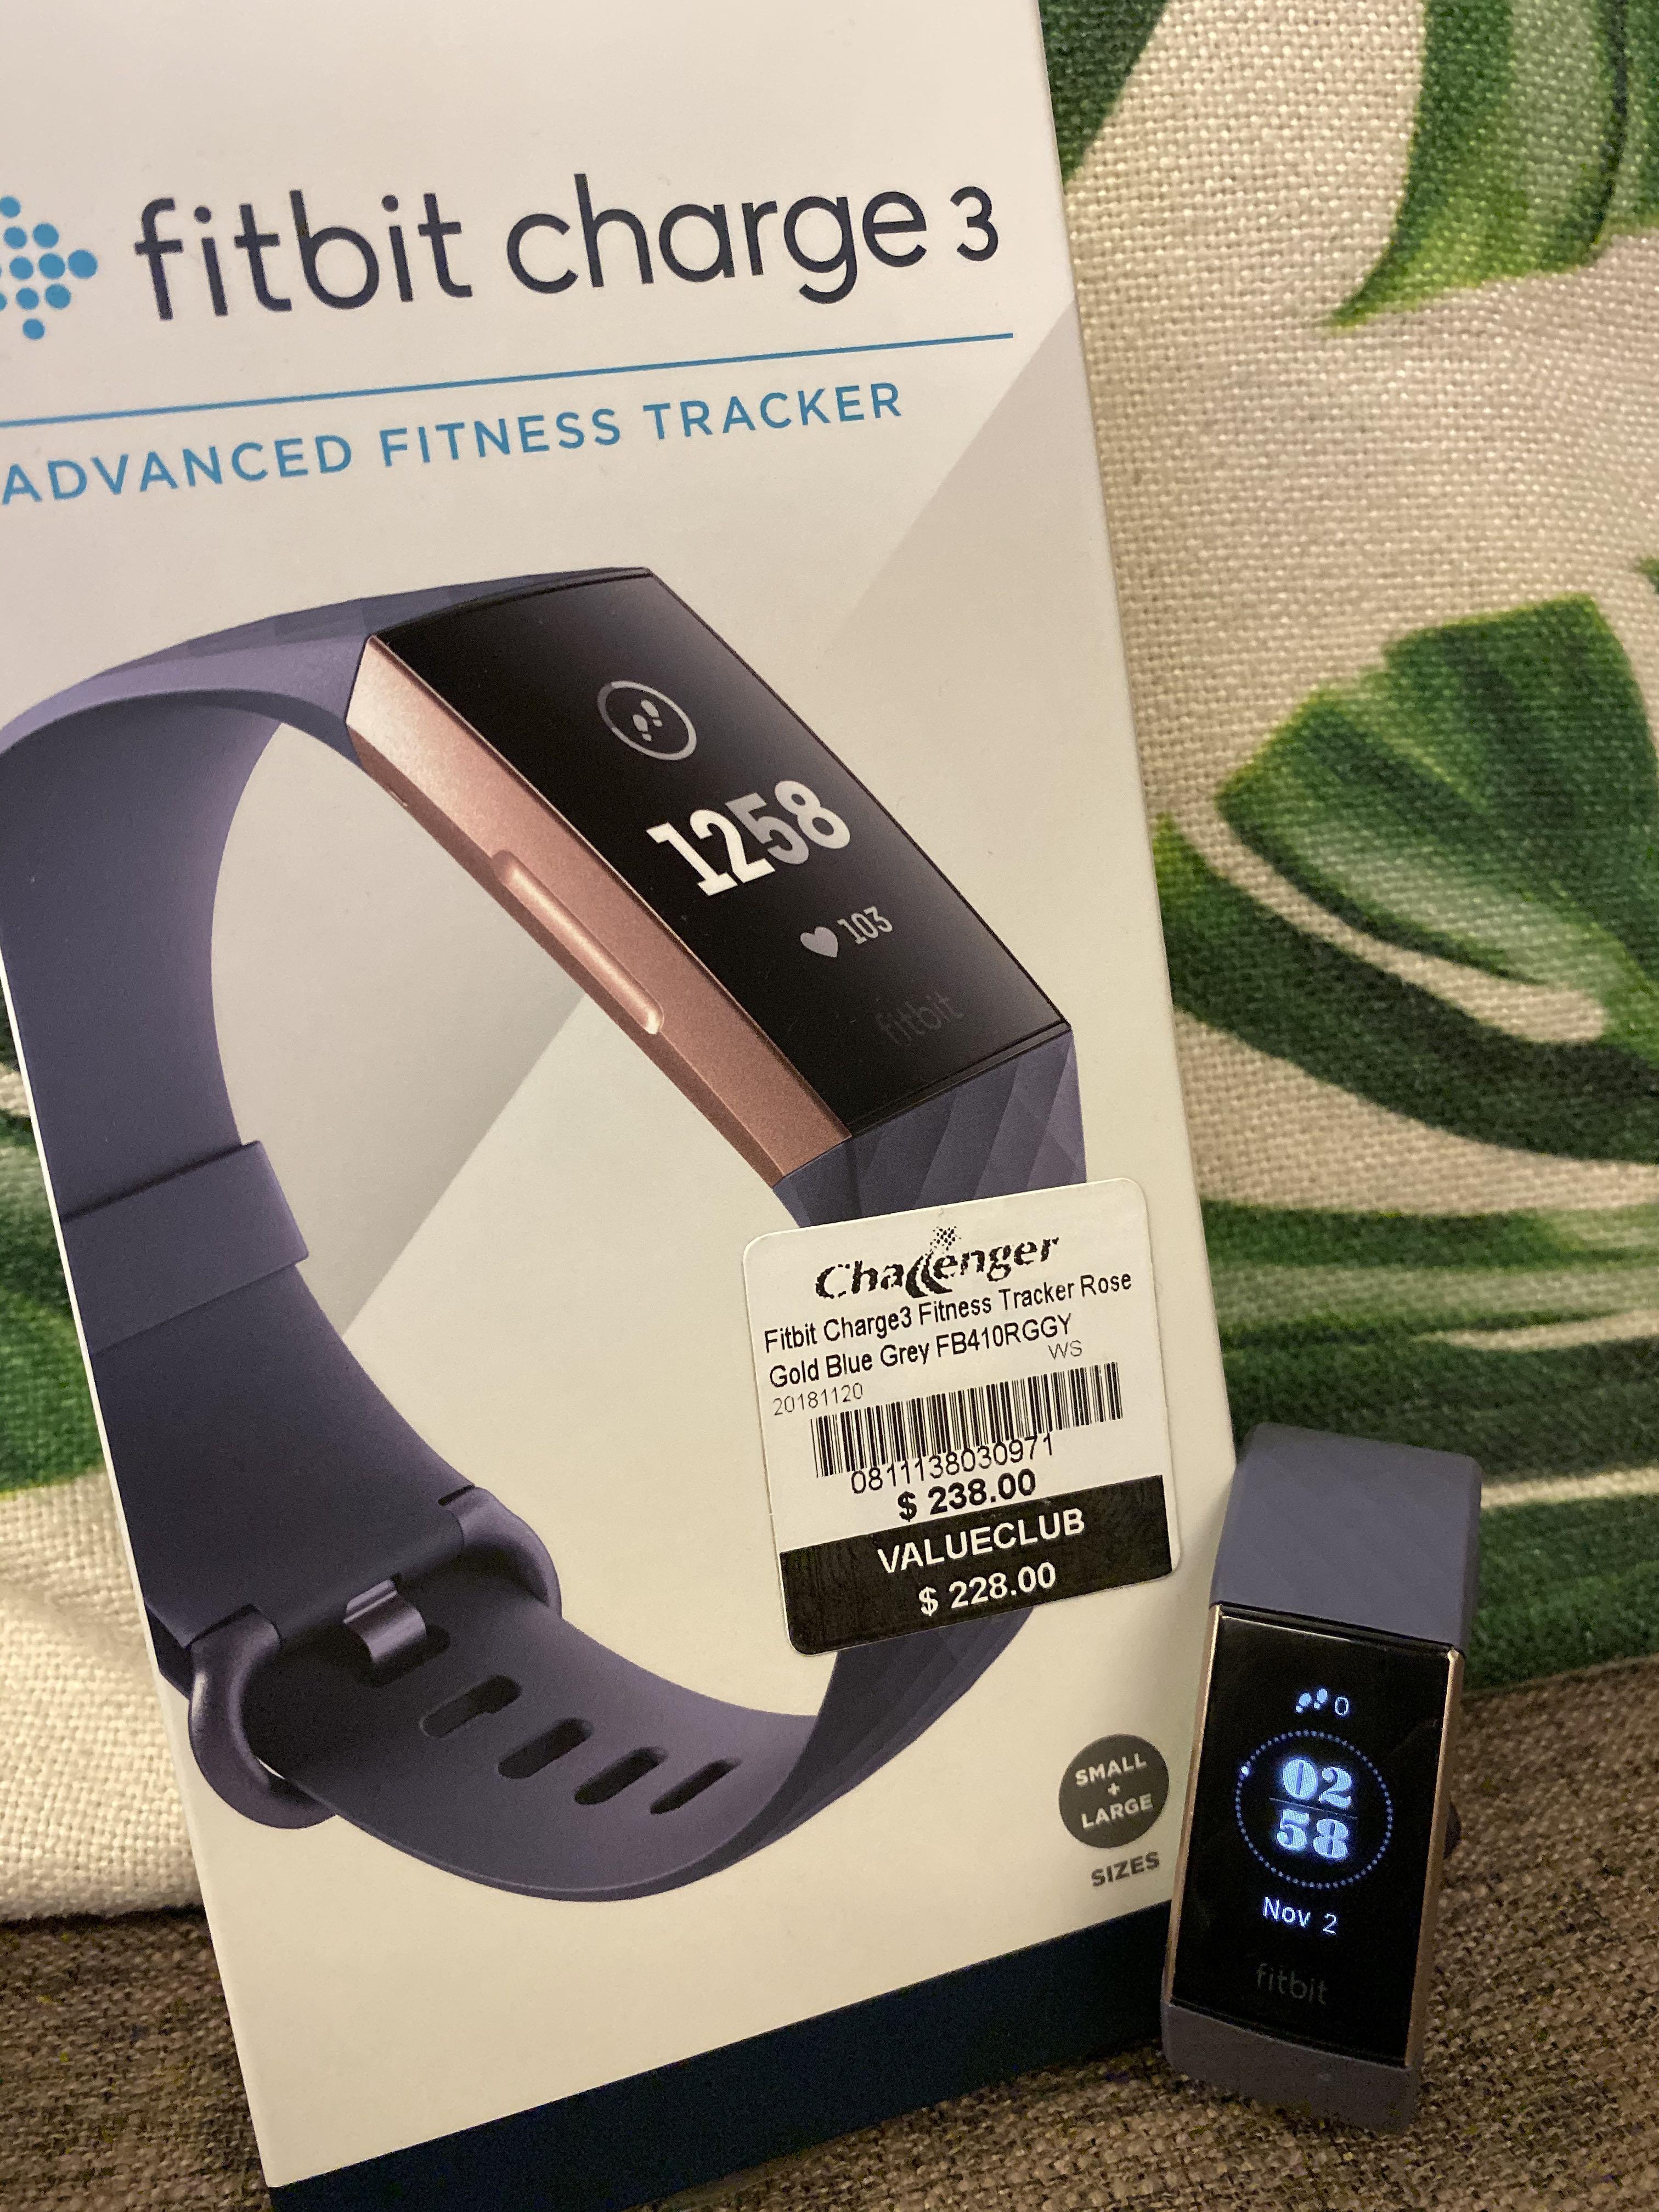 challenger fitbit charge 3